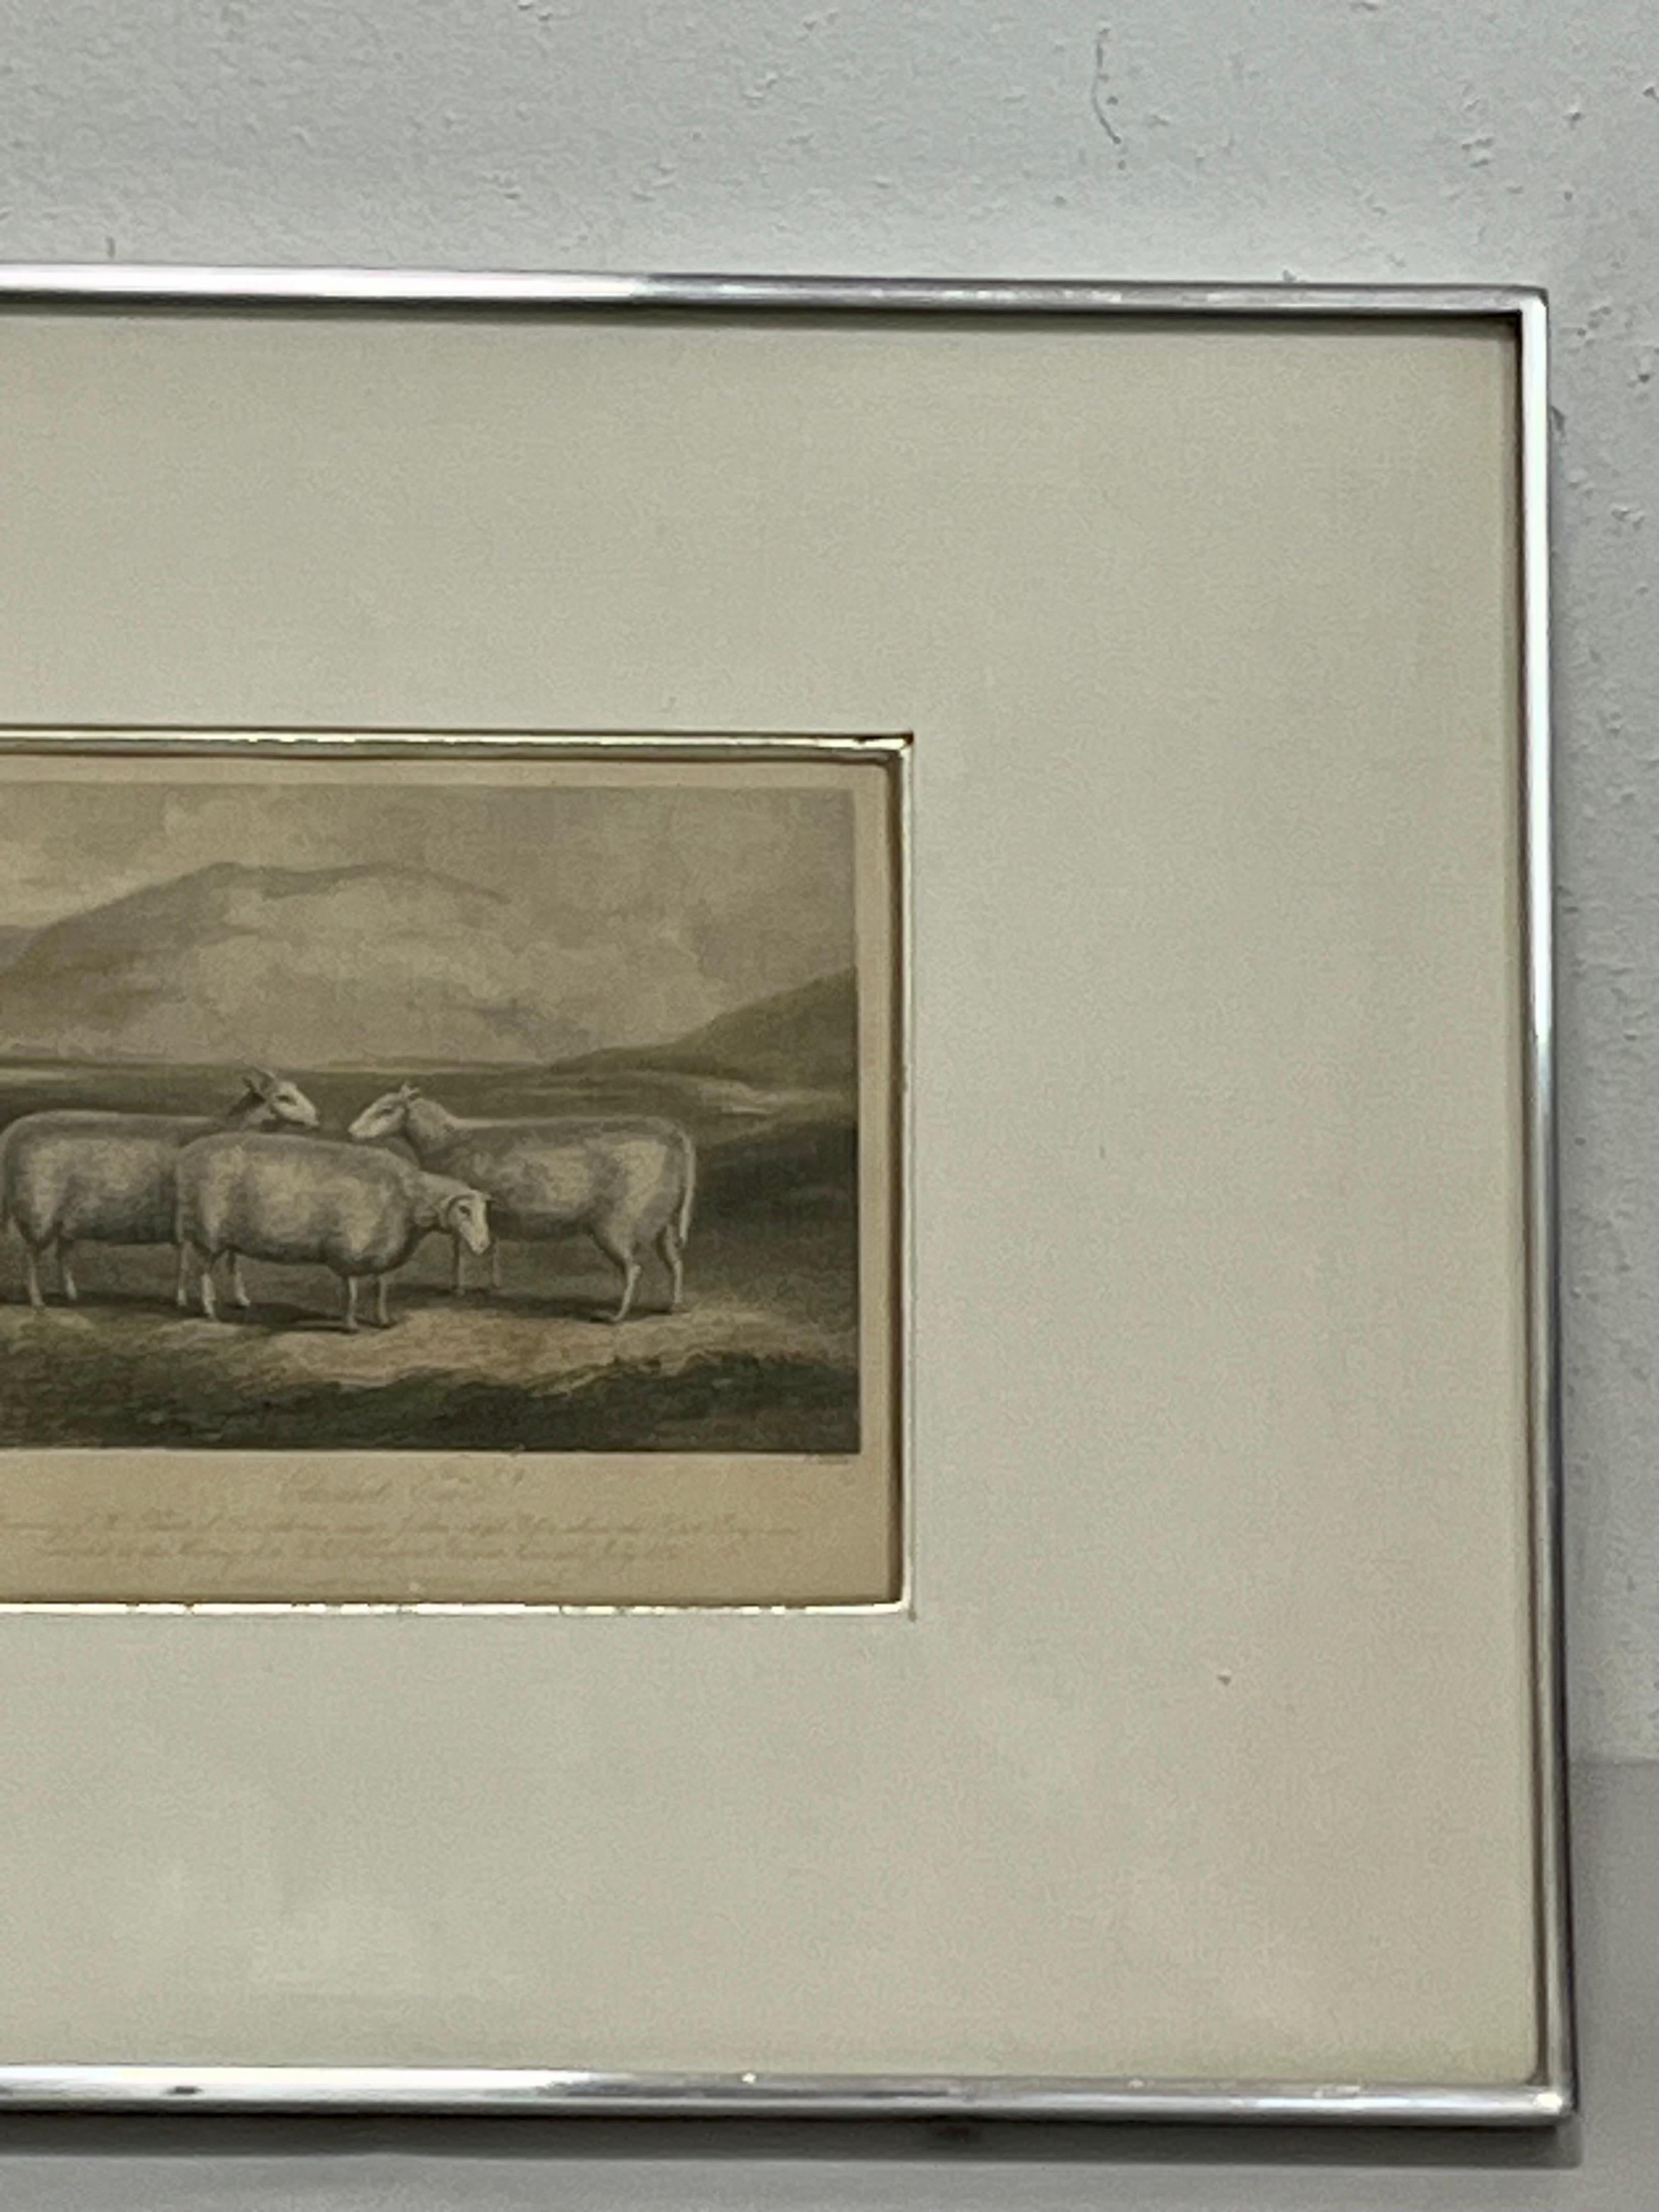 19th Century English Print by W. H. Davis of Cheviot Ewes in Kulicke Frame 1